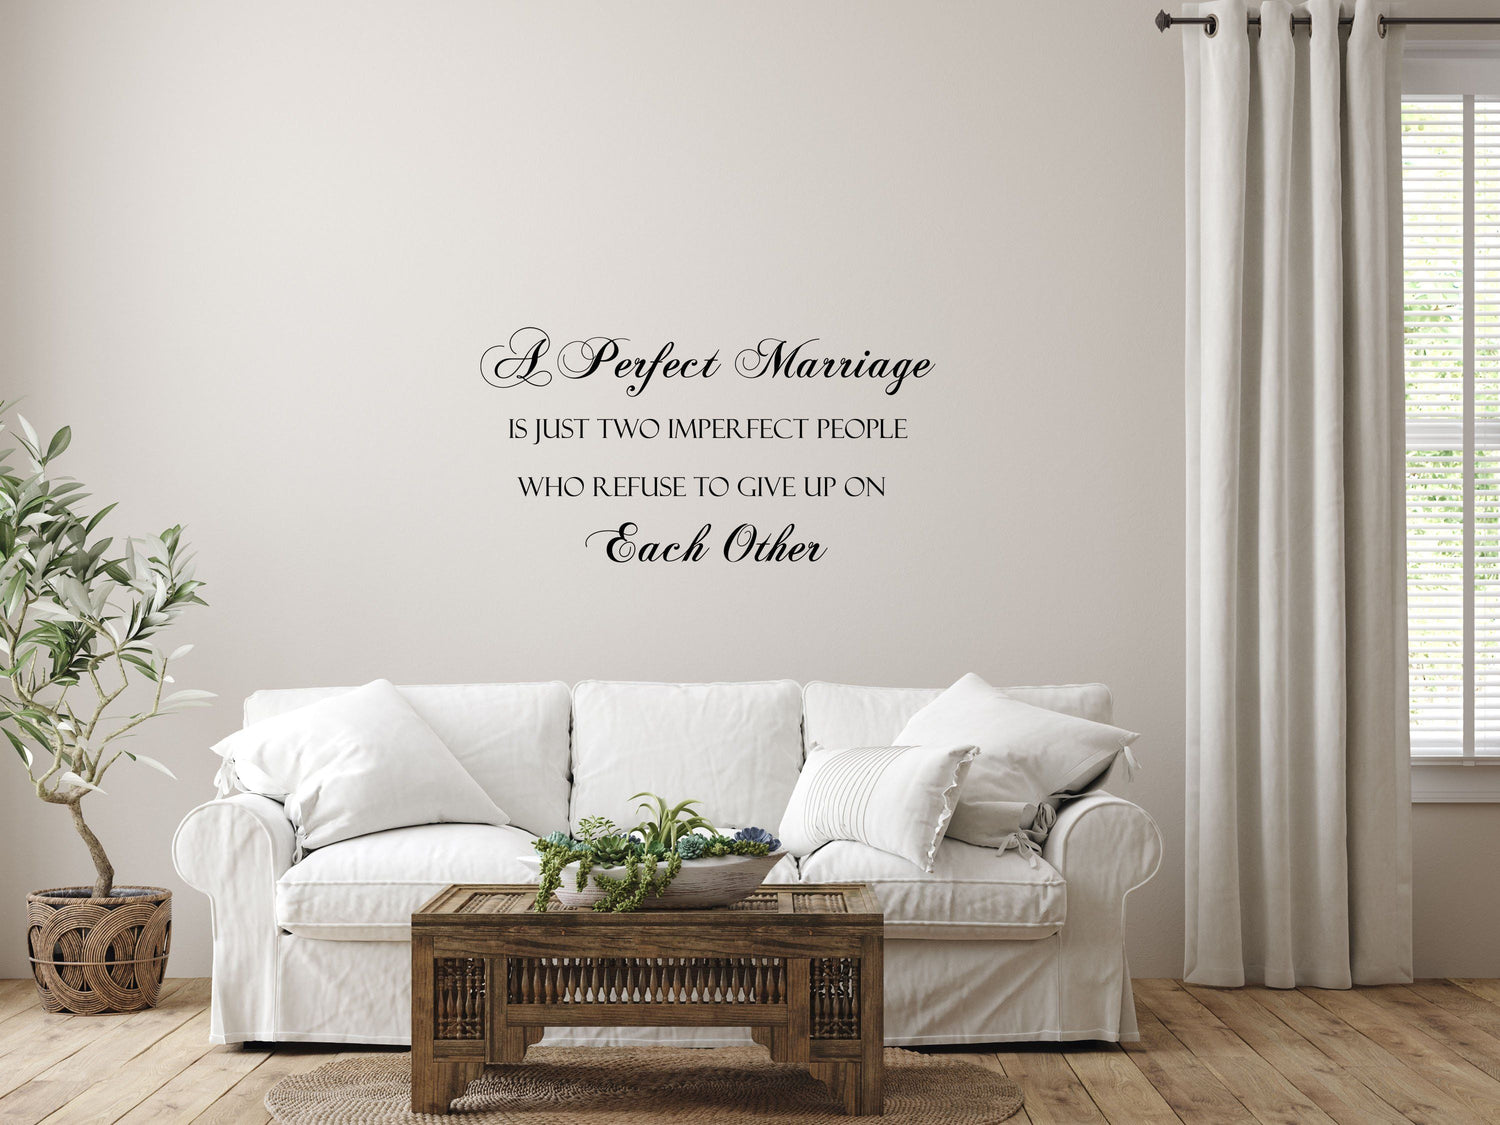 Perfect Marriage - Inspirational Wall Decals Vinyl Wall Decal Done 